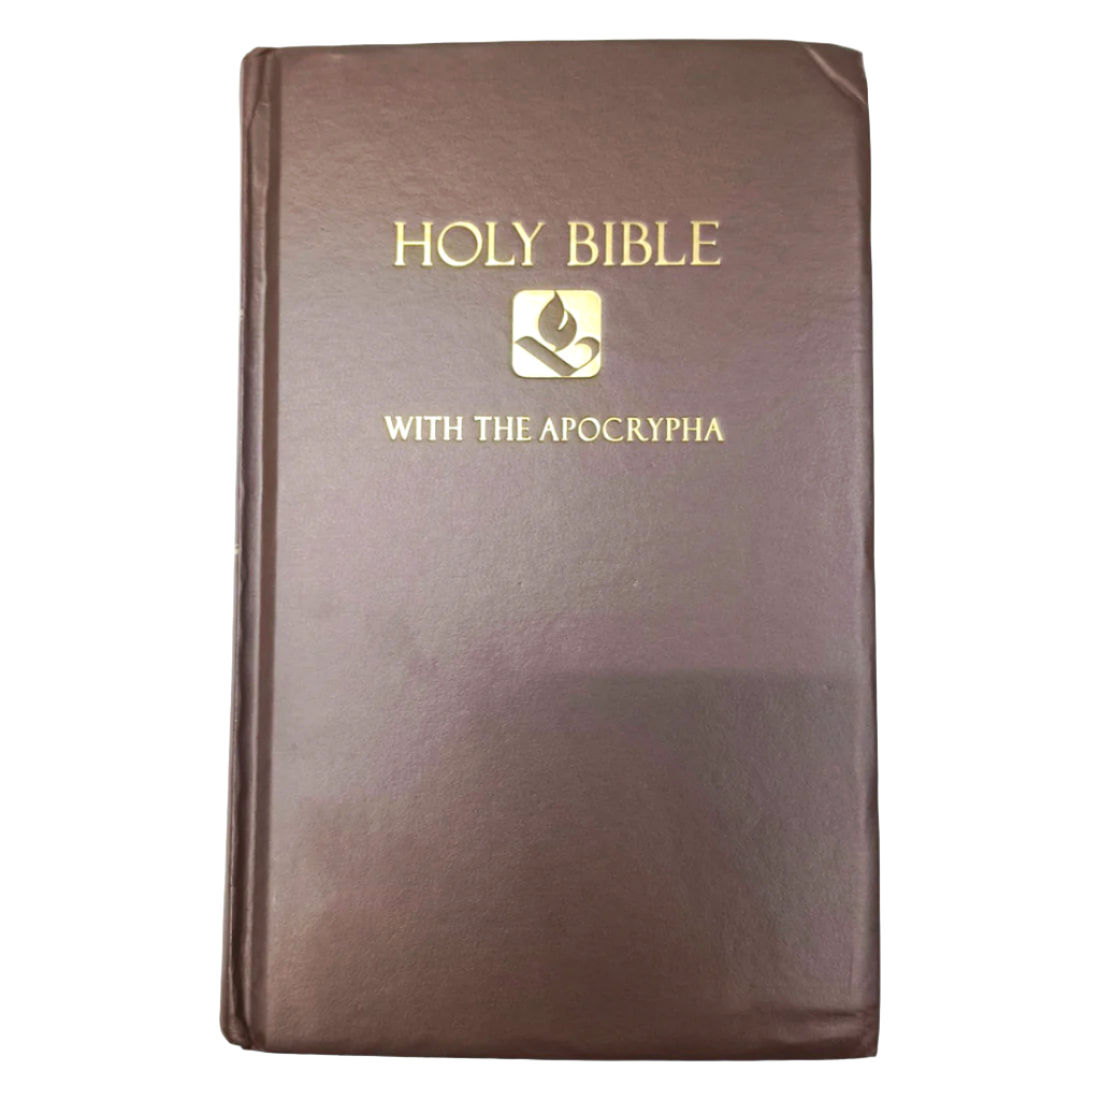 Holy Bible | With The Apocrypha | Hard Bound | New Edition 